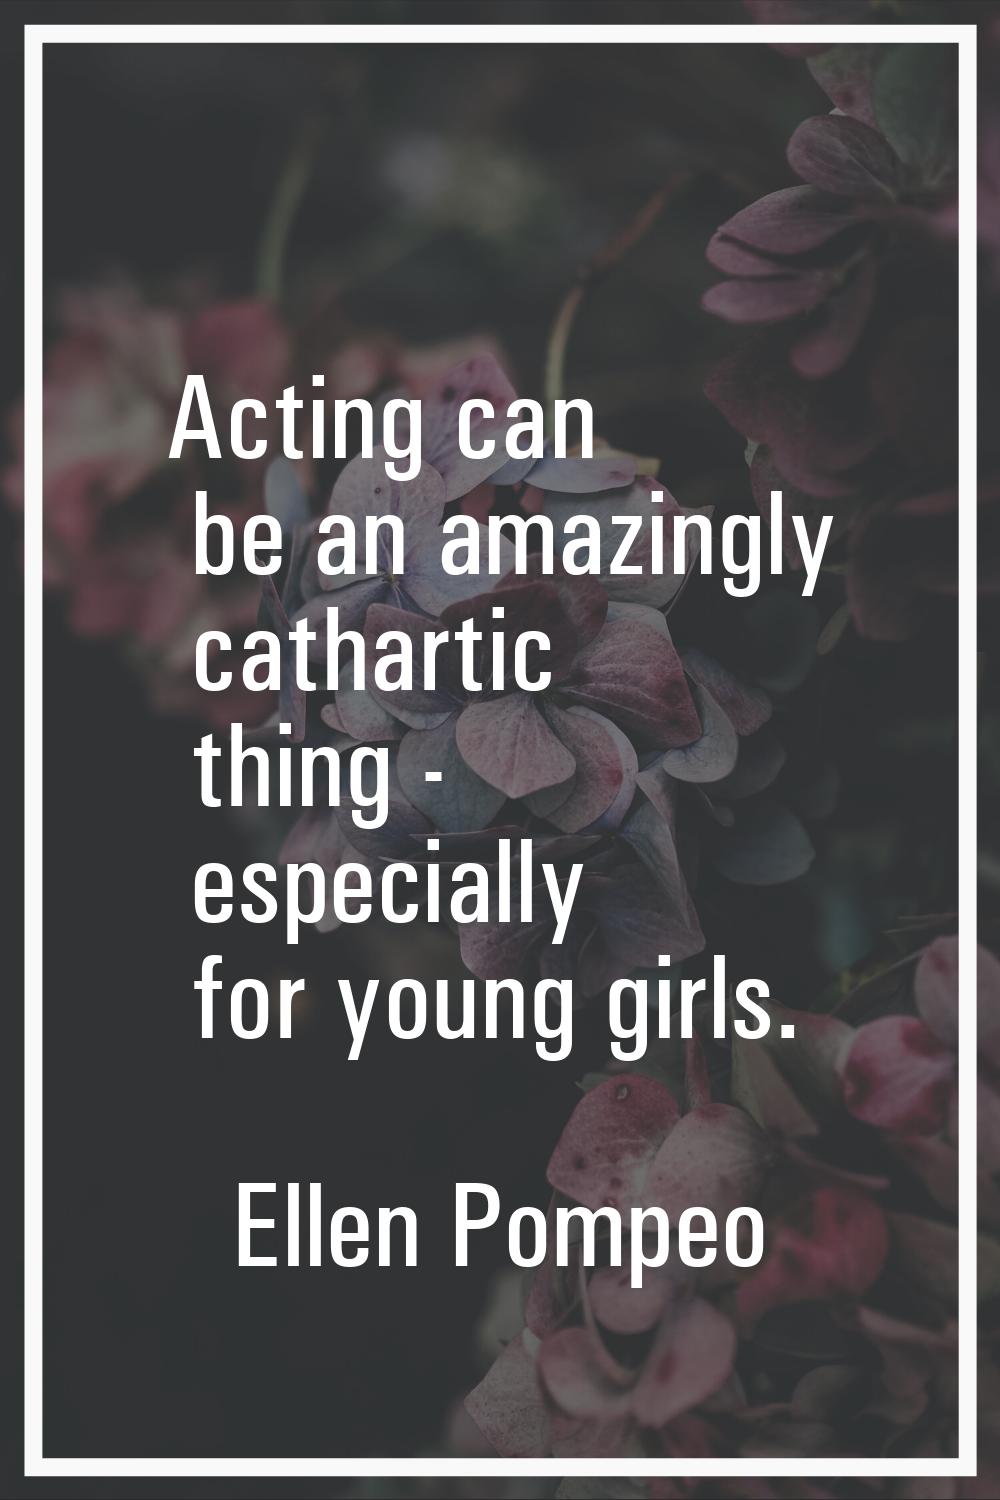 Acting can be an amazingly cathartic thing - especially for young girls.